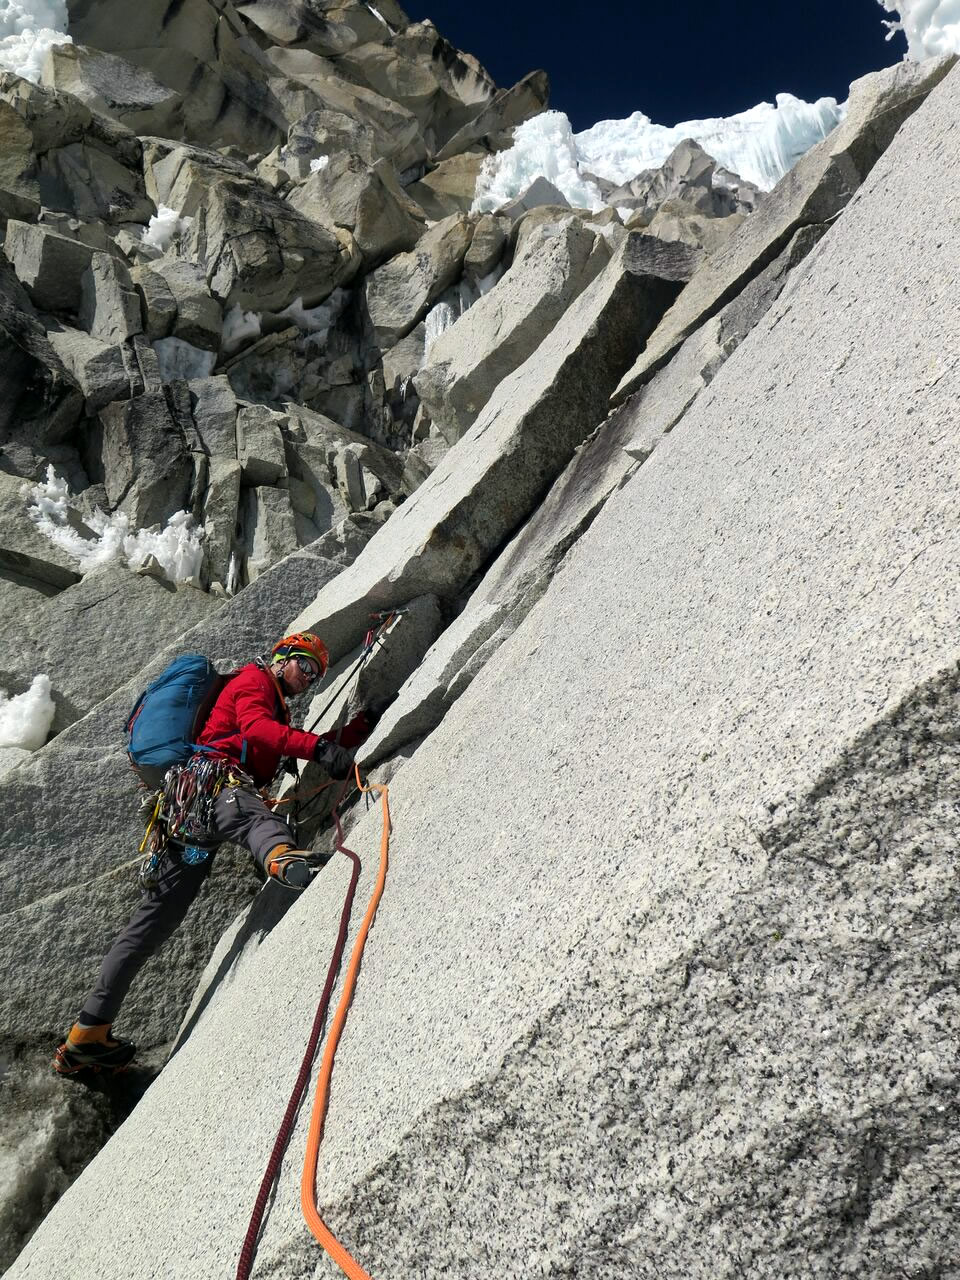 Ben Dare leading the first pitch of mixed terrain on the peak's upper north face. [Photo] Steve Skelton